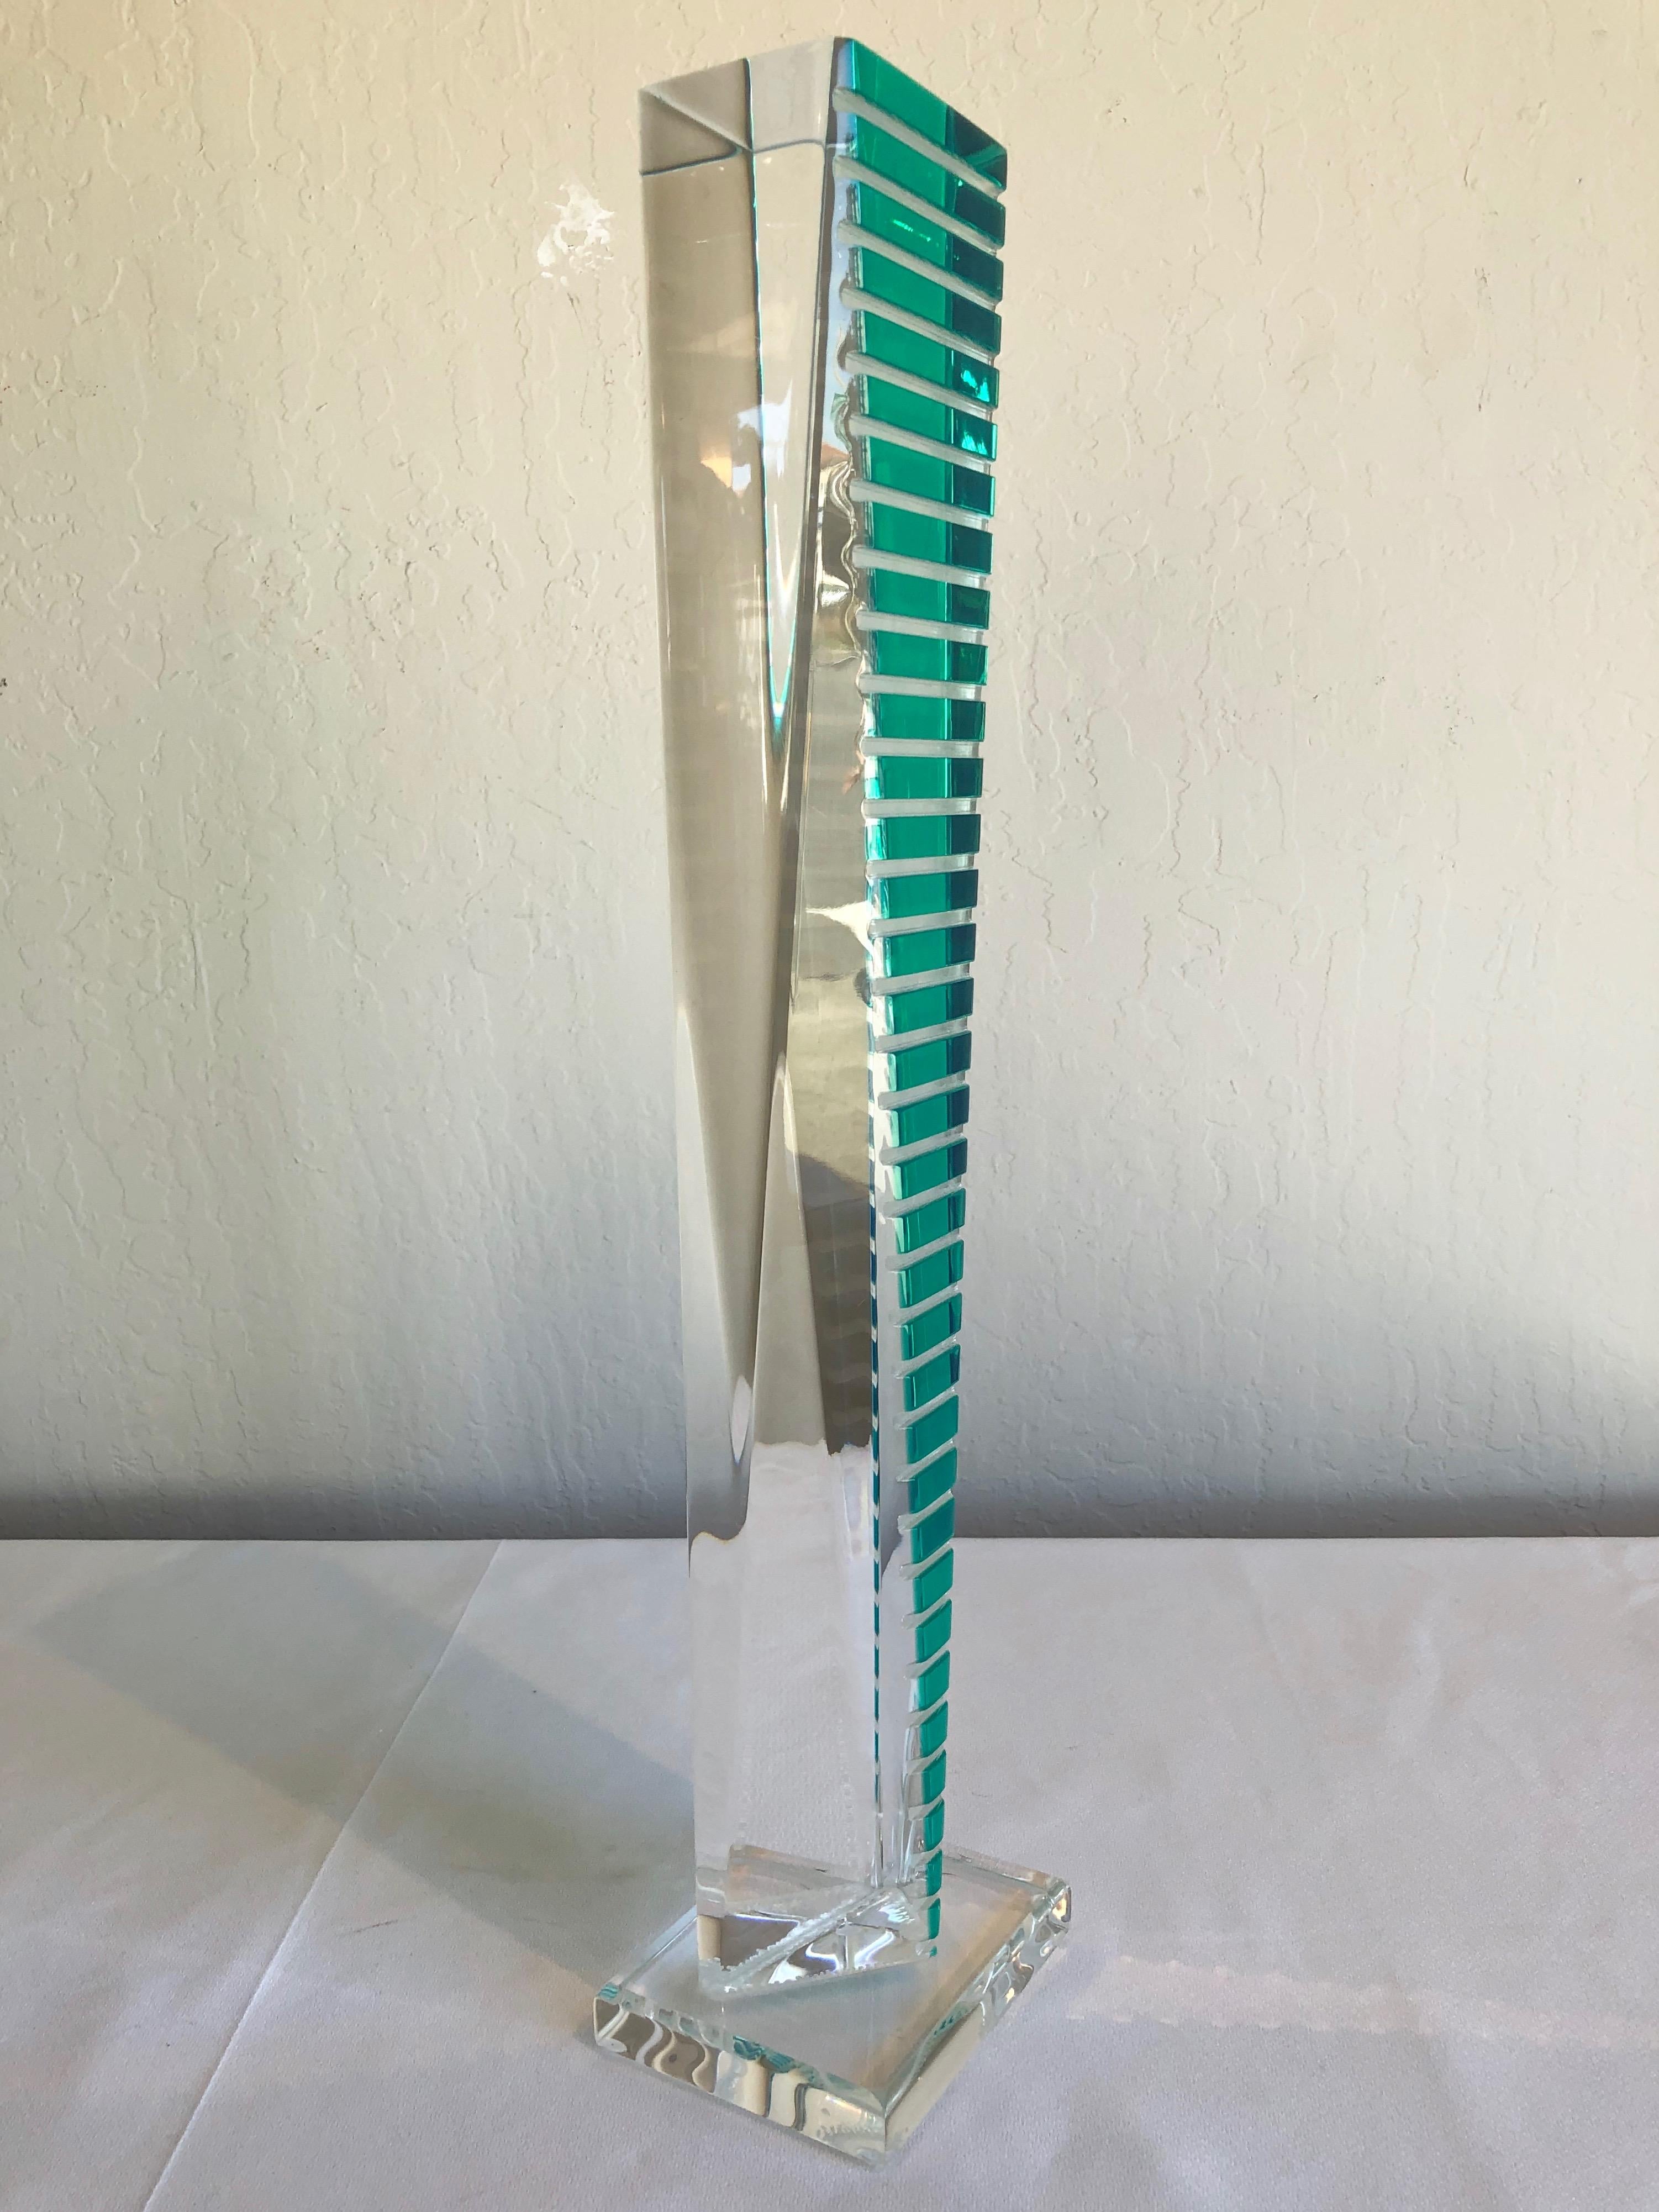 Architectural skyscraper-like form of faceted crystal clear solid lucite transitions from a triangular bottom to a rectangular top. Accented on one side by thirty-five stepped bars of translucent turquoise. Exacting geometry results in dynamically